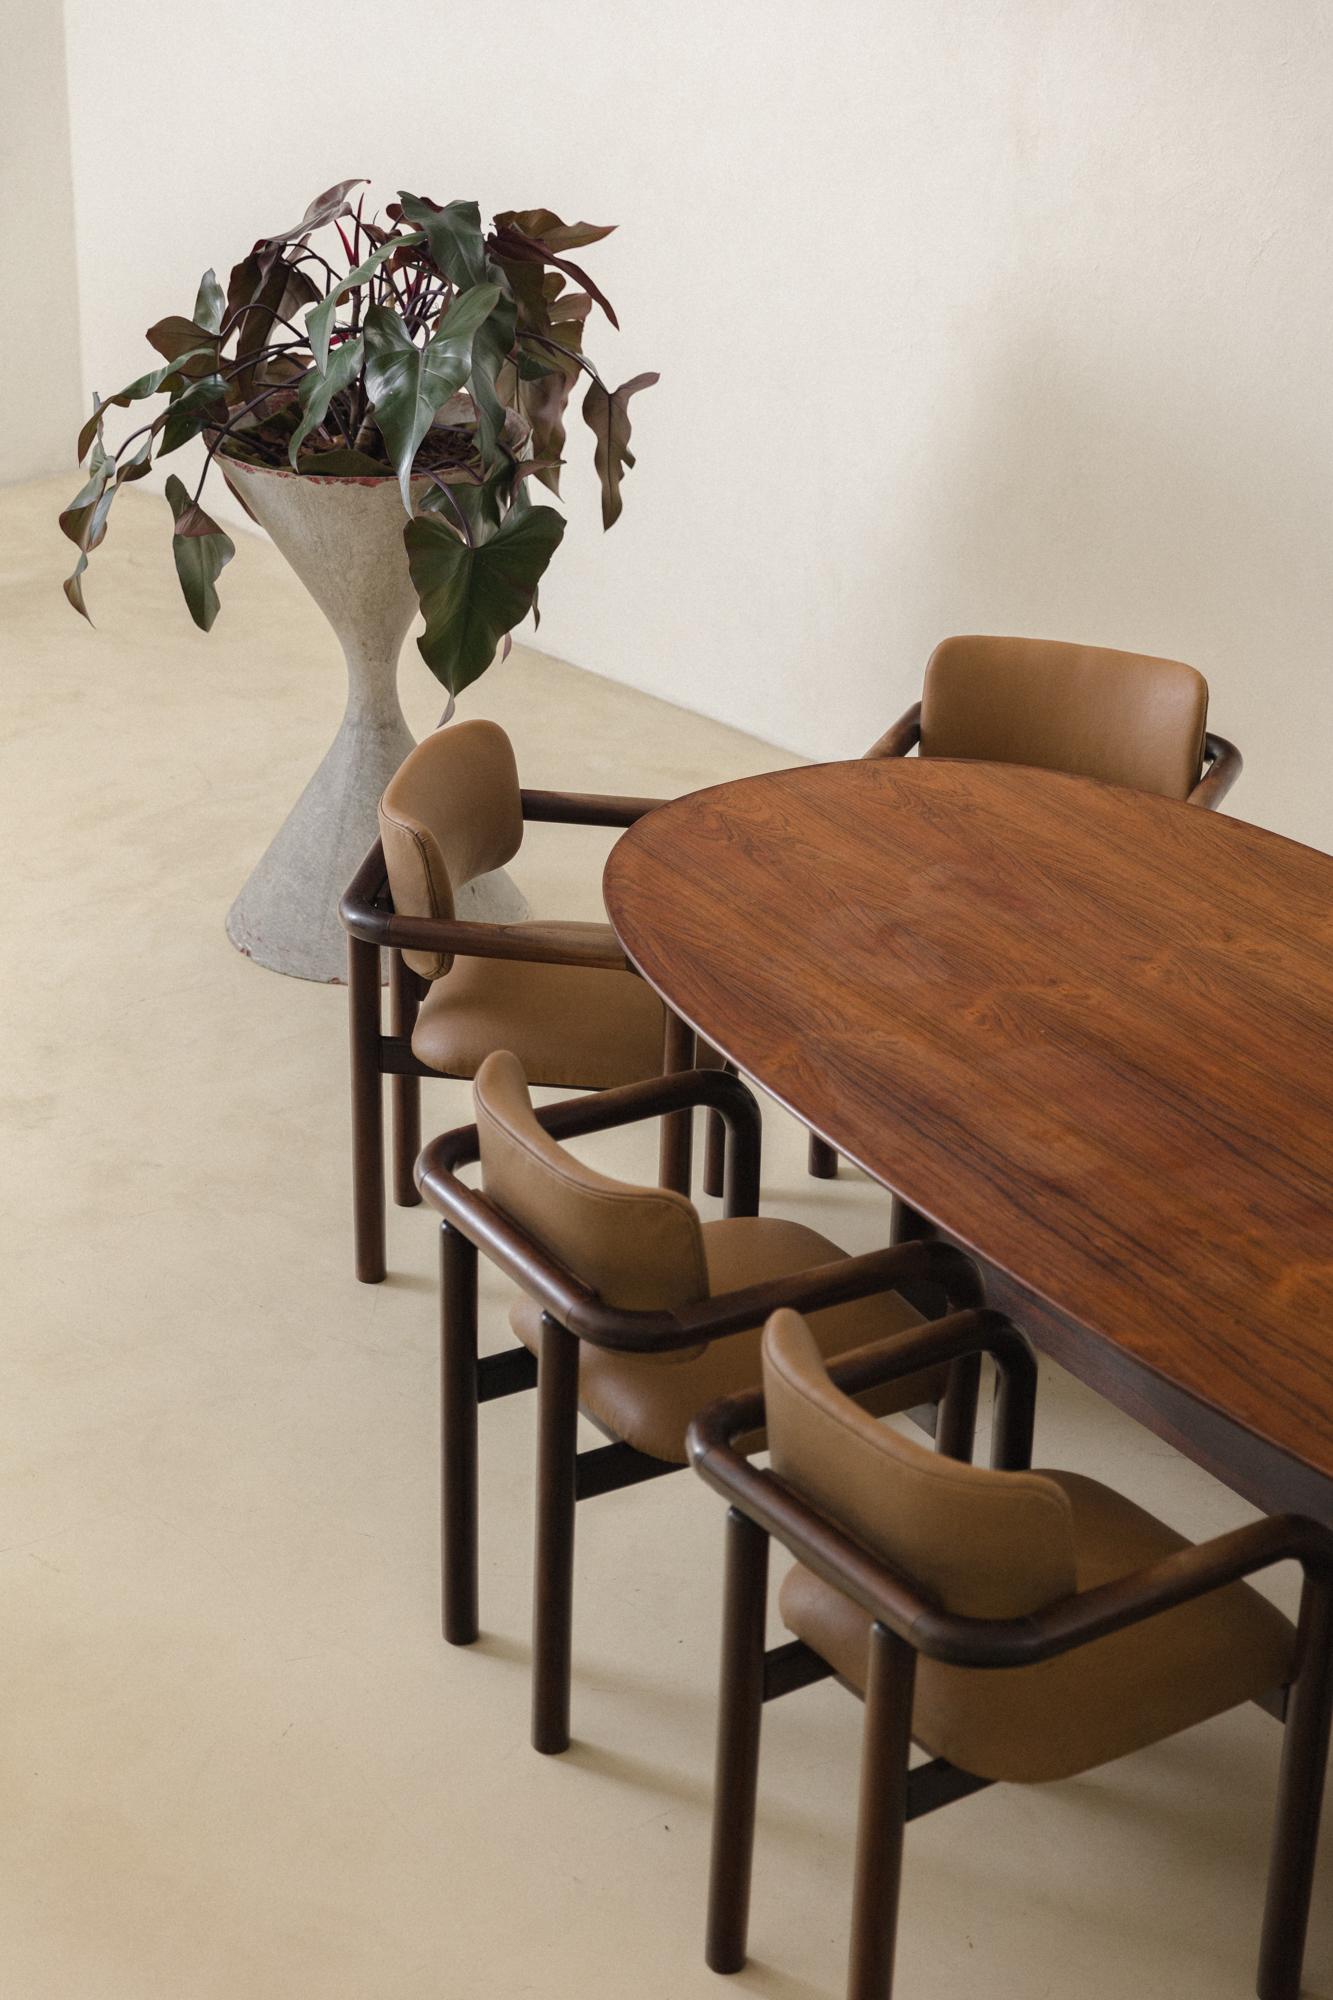 Brazilian Midcentury Dining Table in Rosewood, Unknown designer, 1960s For Sale 2